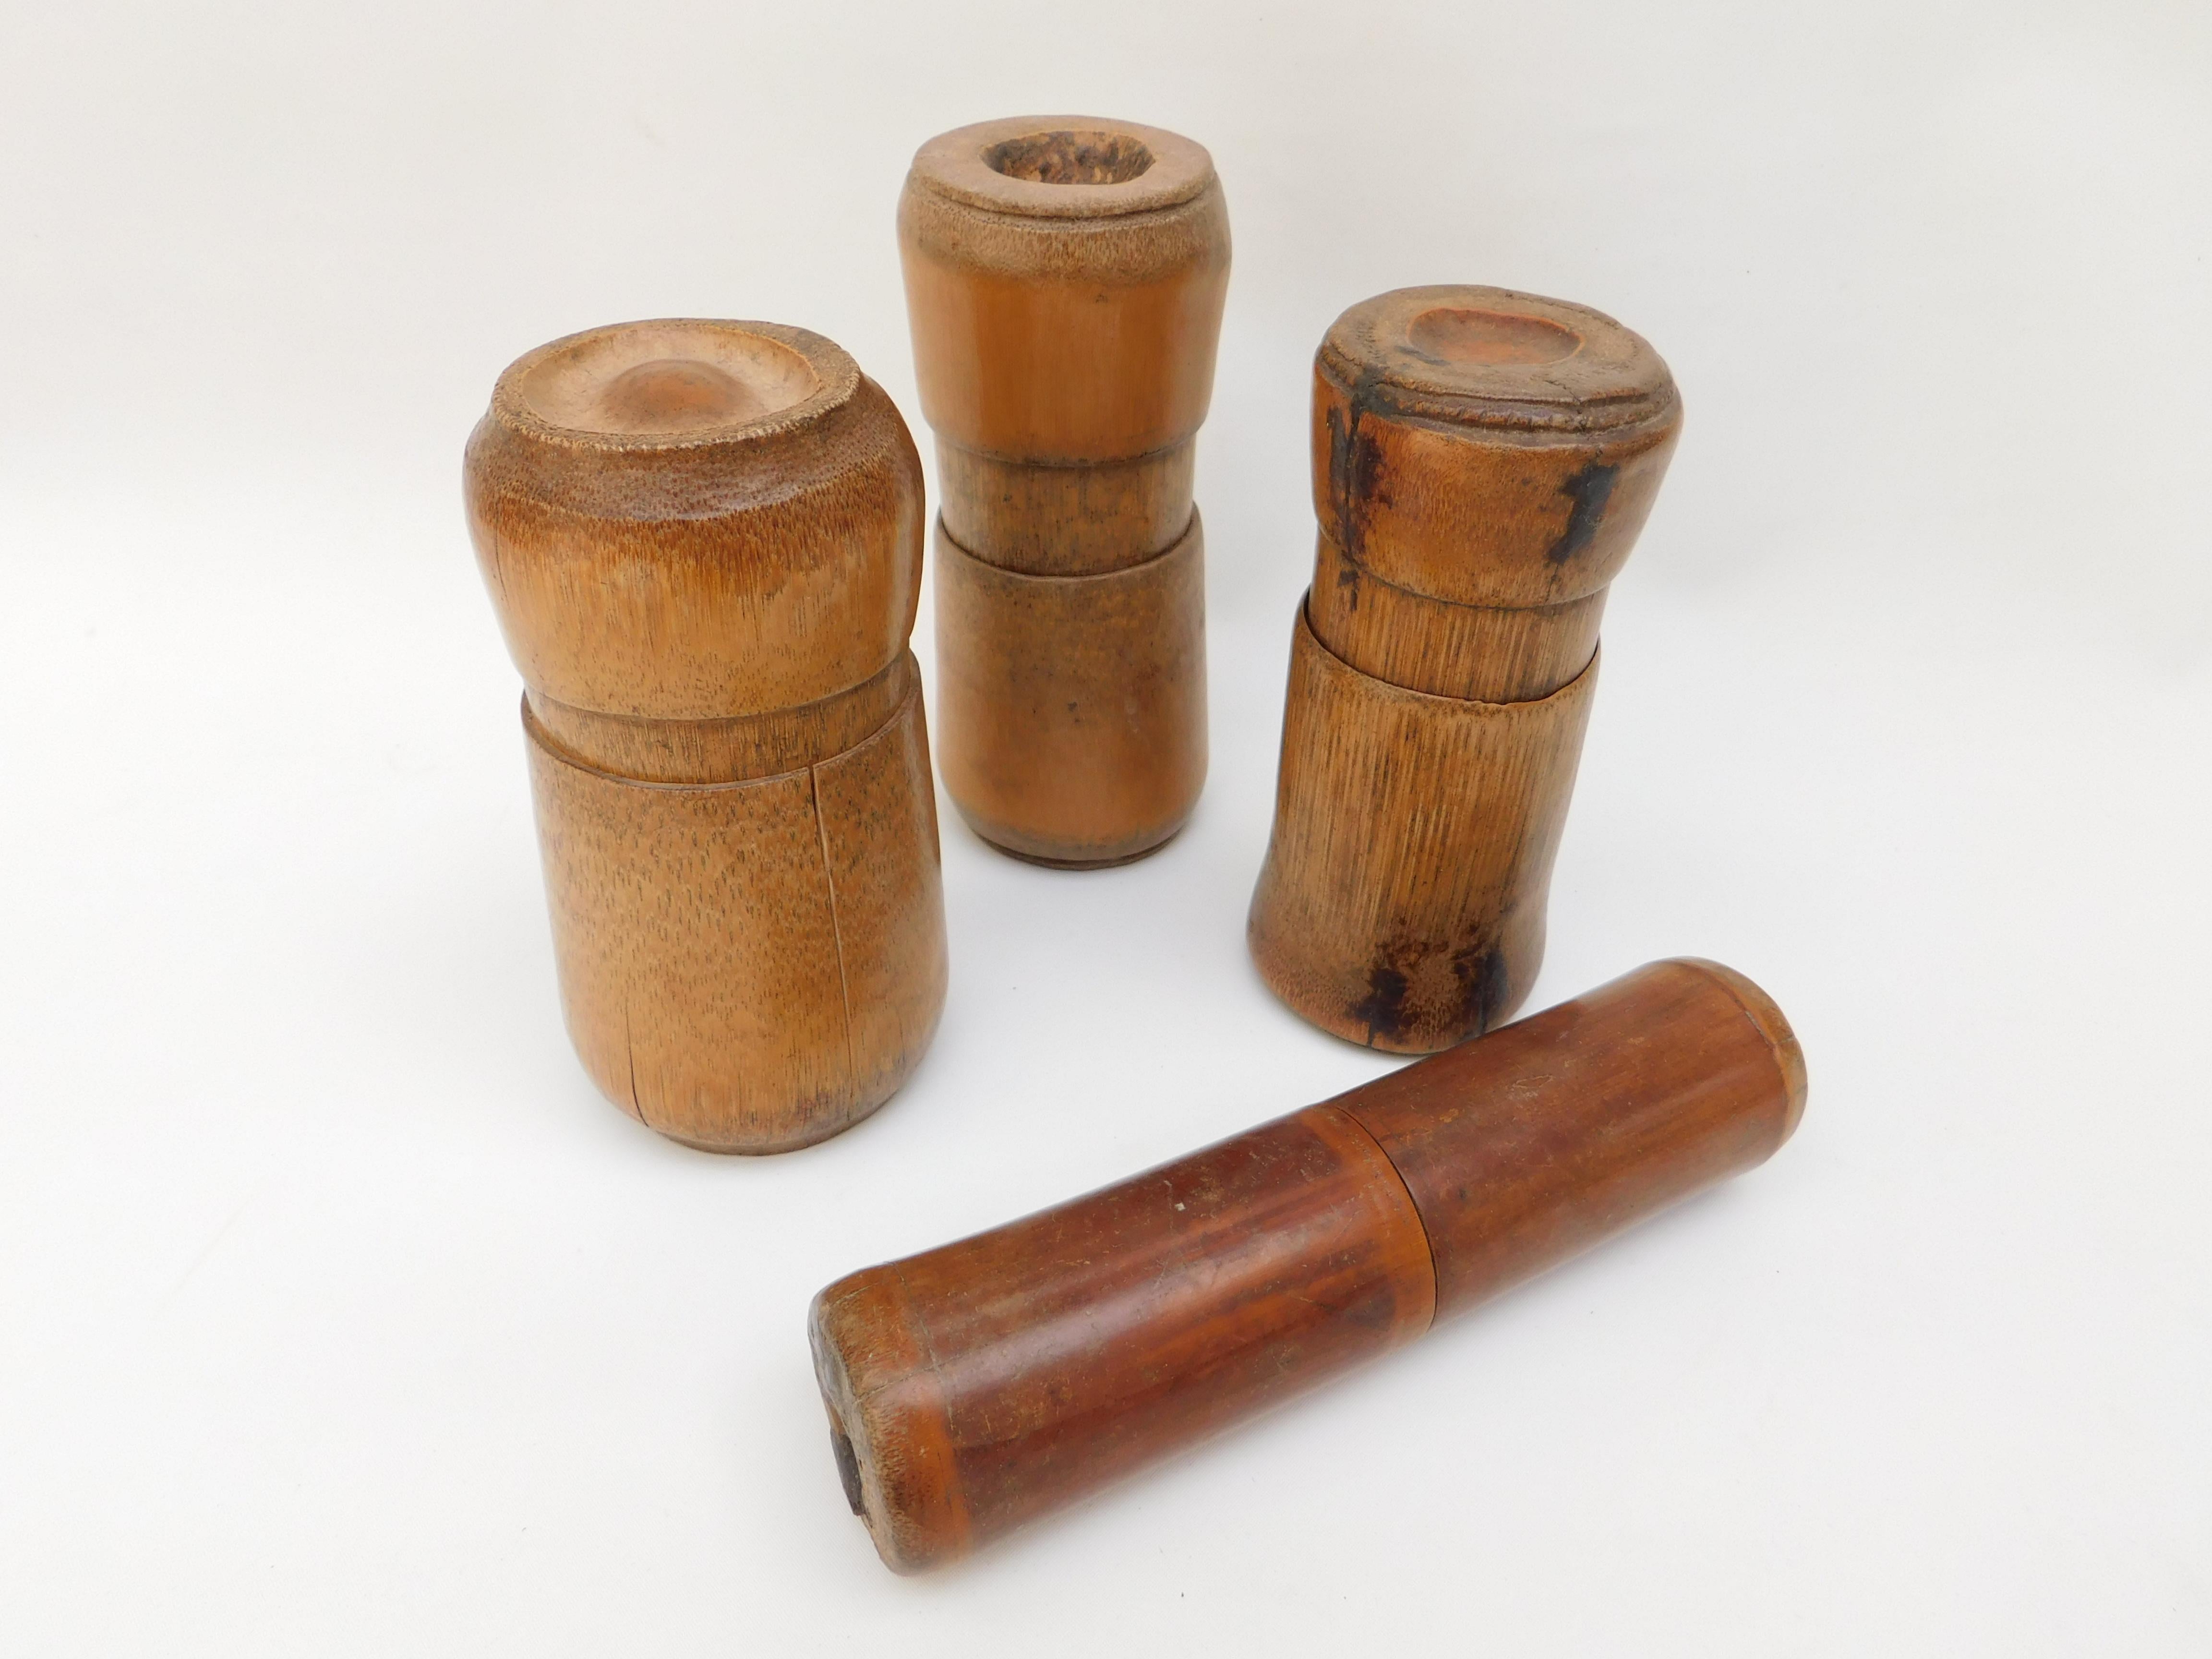 A collection of four circa 1940 bamboo boxes from the South Pacific. The two part boxes are made from full bamboo stalks that twist together and seal to protect items such as documents, herbs and medicinal items. 
measurements (in centimeters)
14